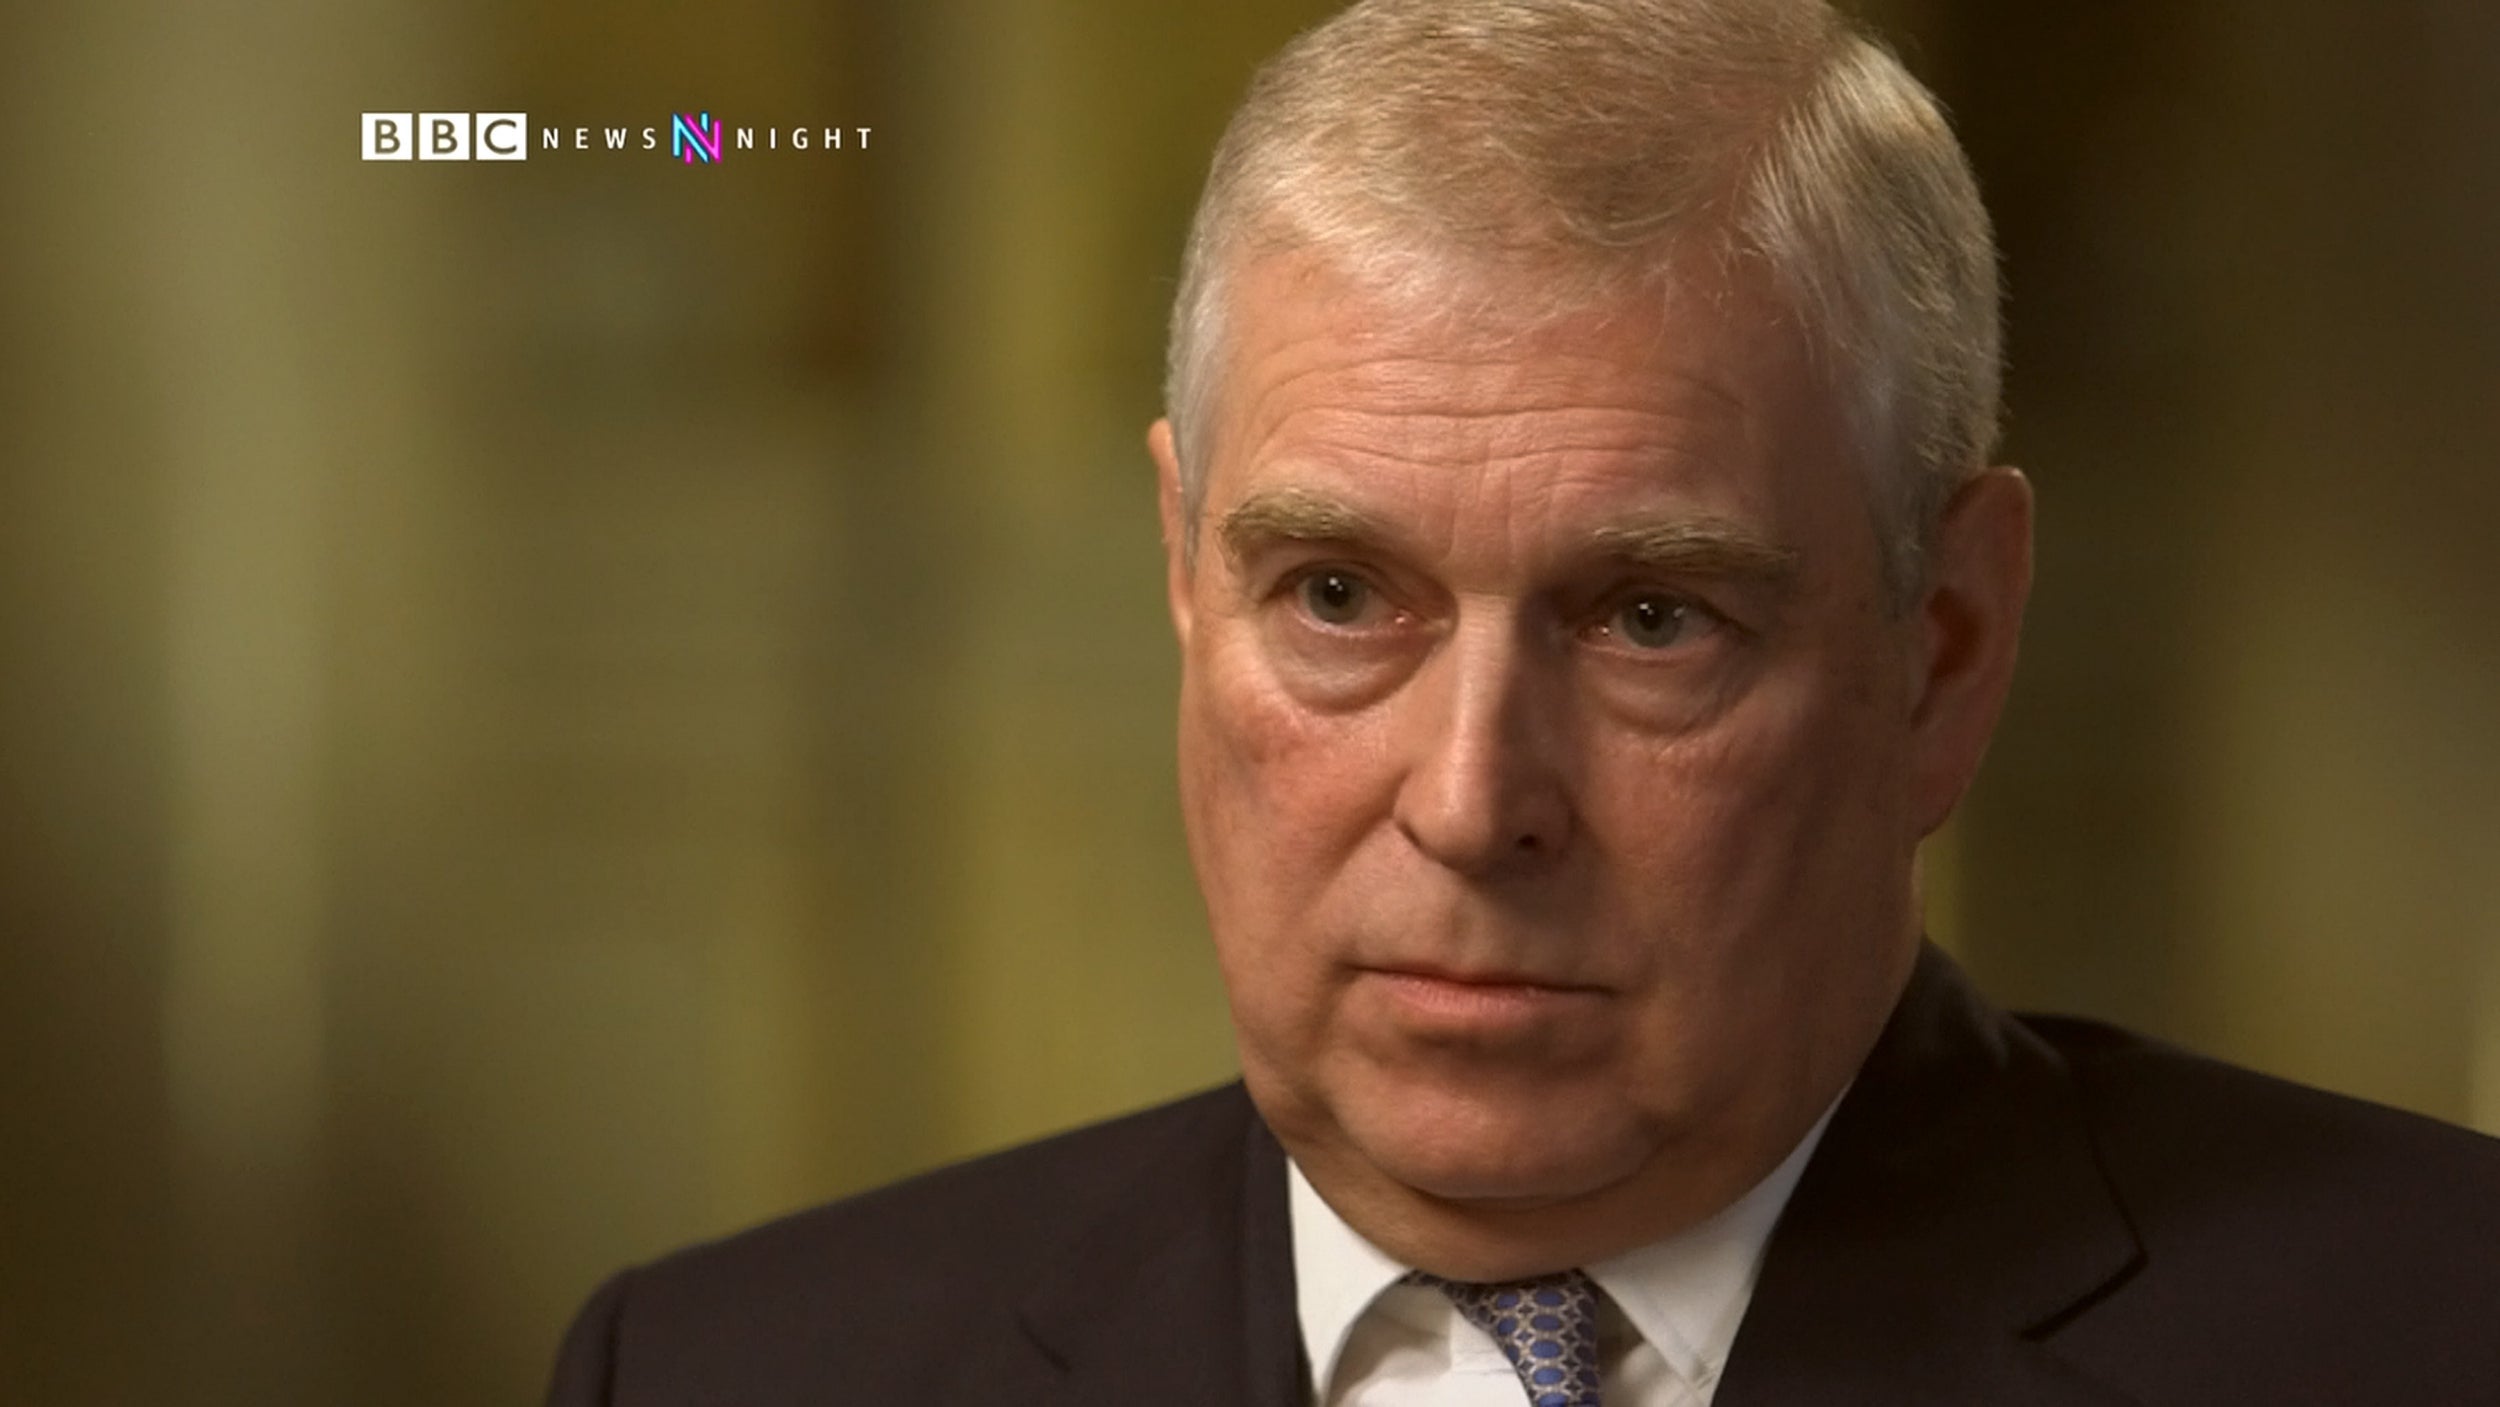 Prince Andrew claimed the photograph was a fake during his infamous BBC interview in 2019